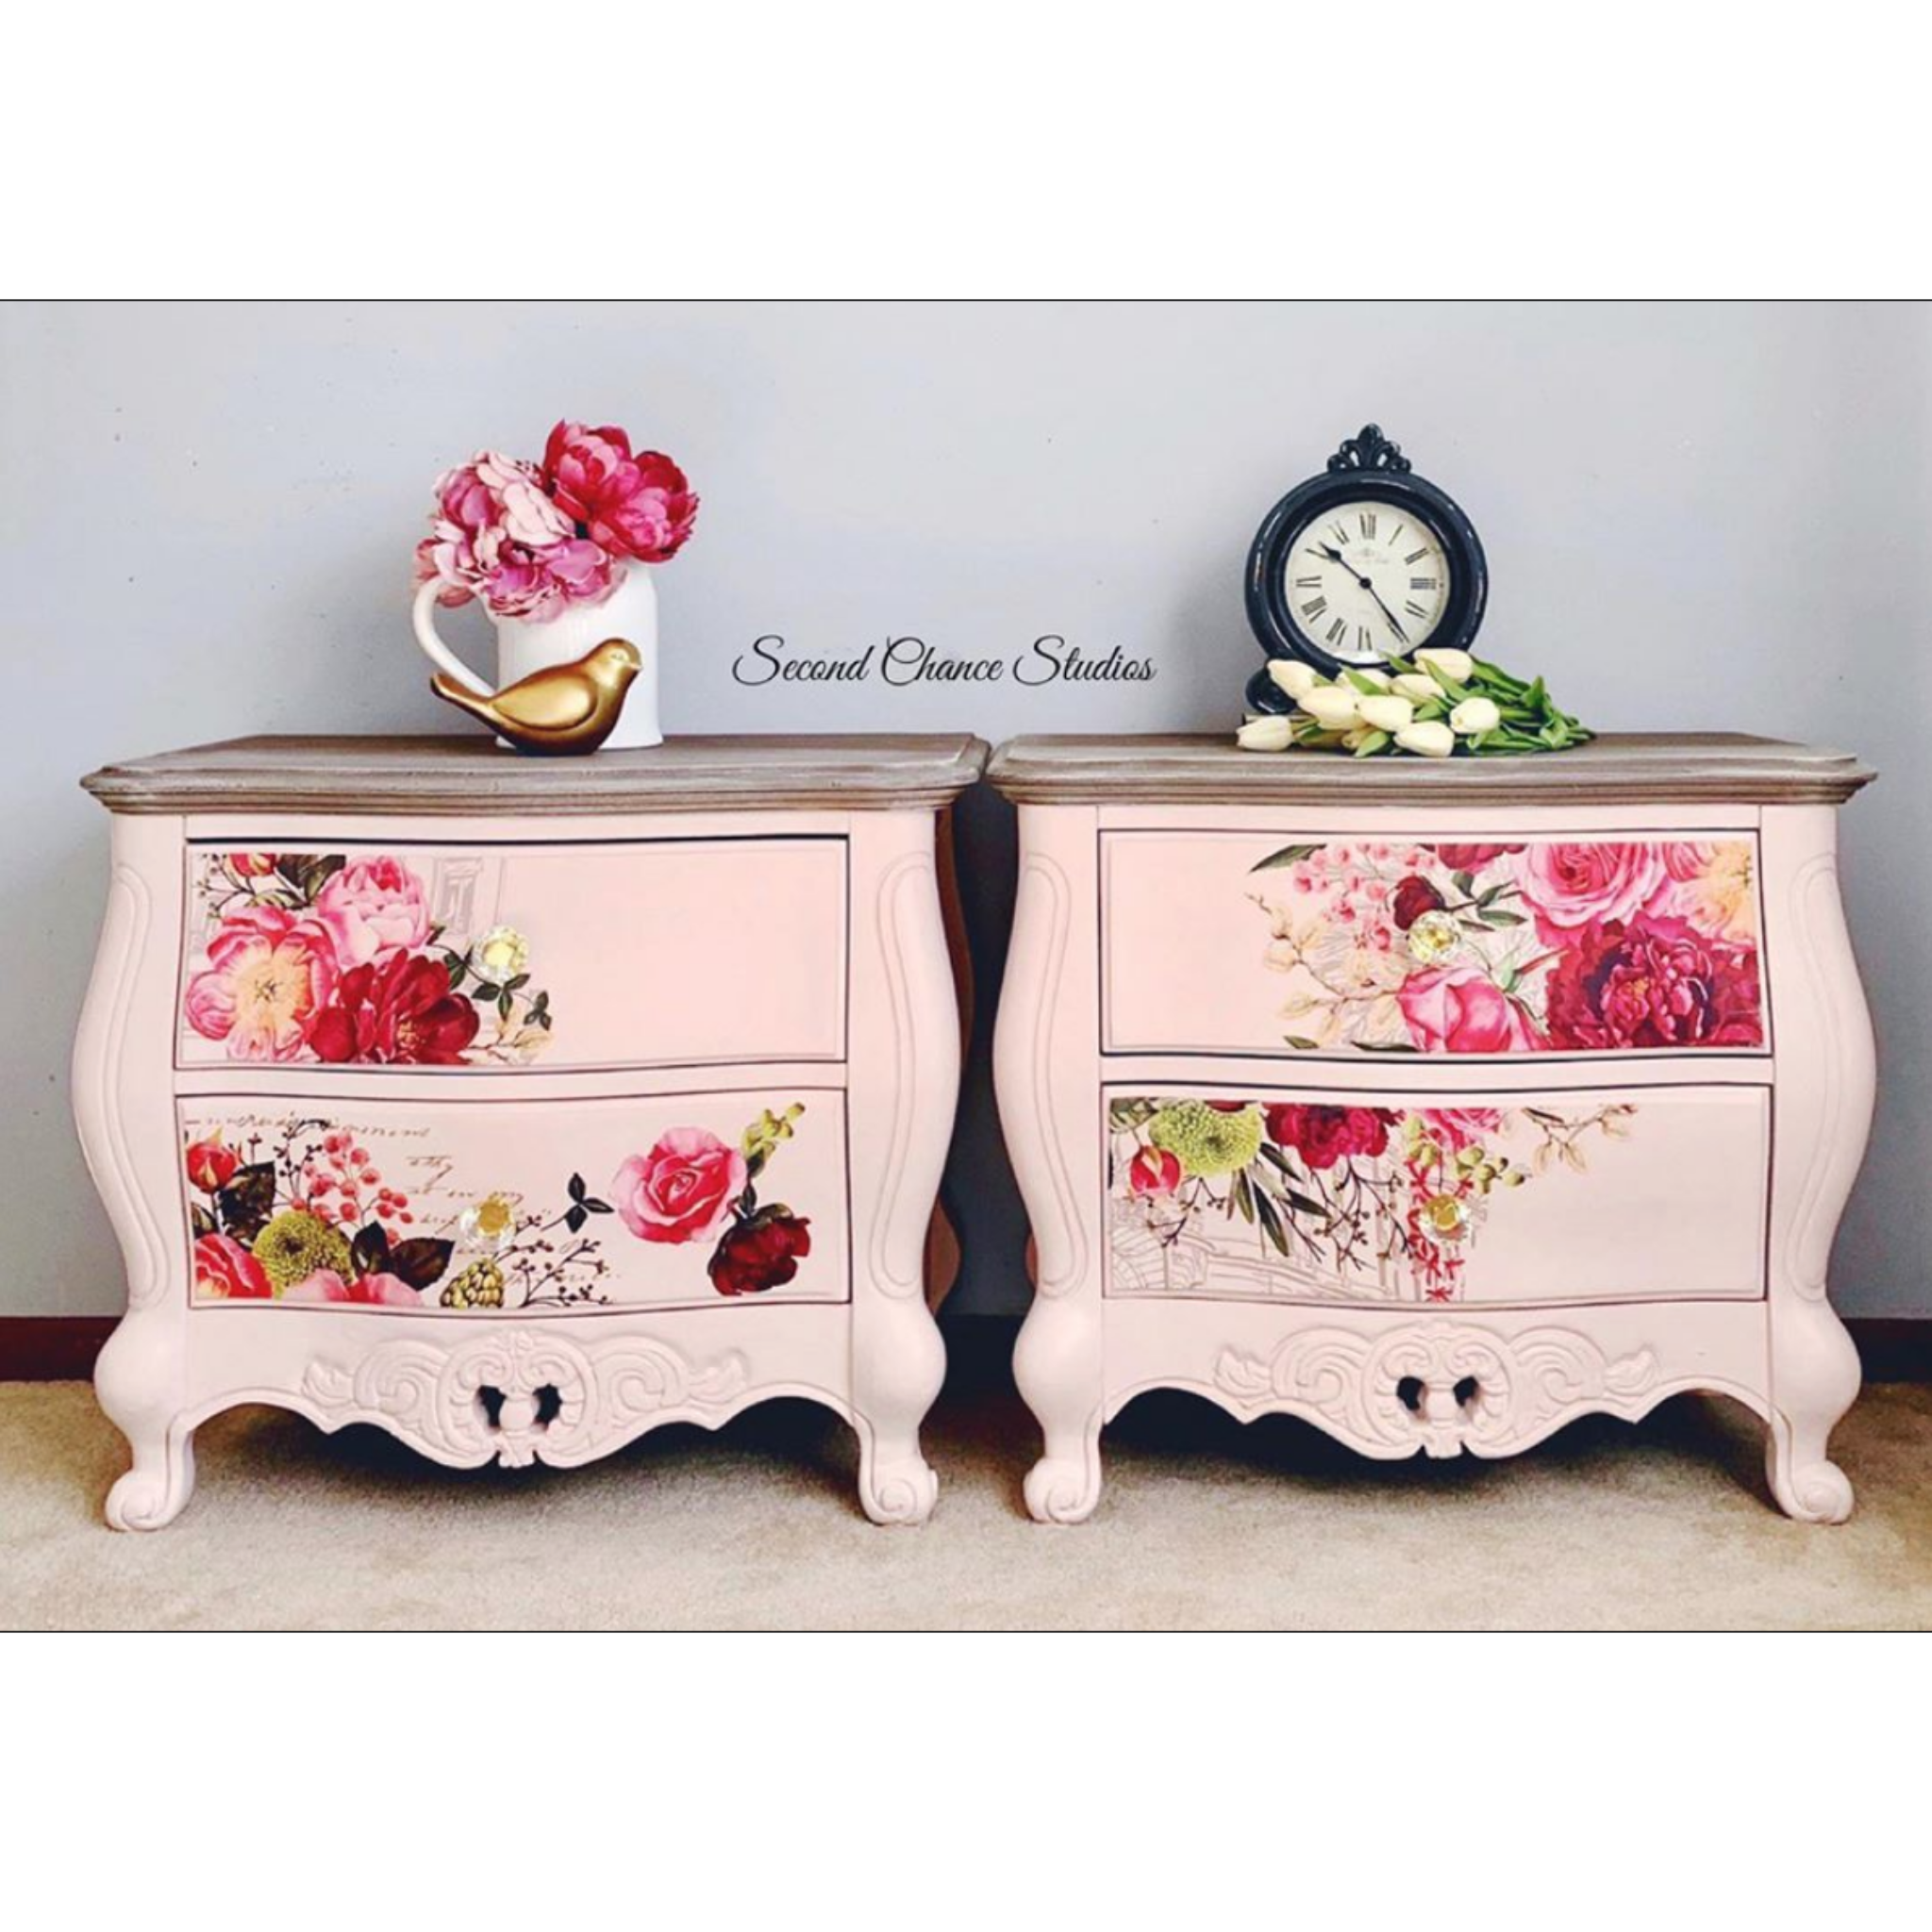 Two small pink dressers with the Royal Burgundy transfer on top. A black Second Chance Studios logo in the center.